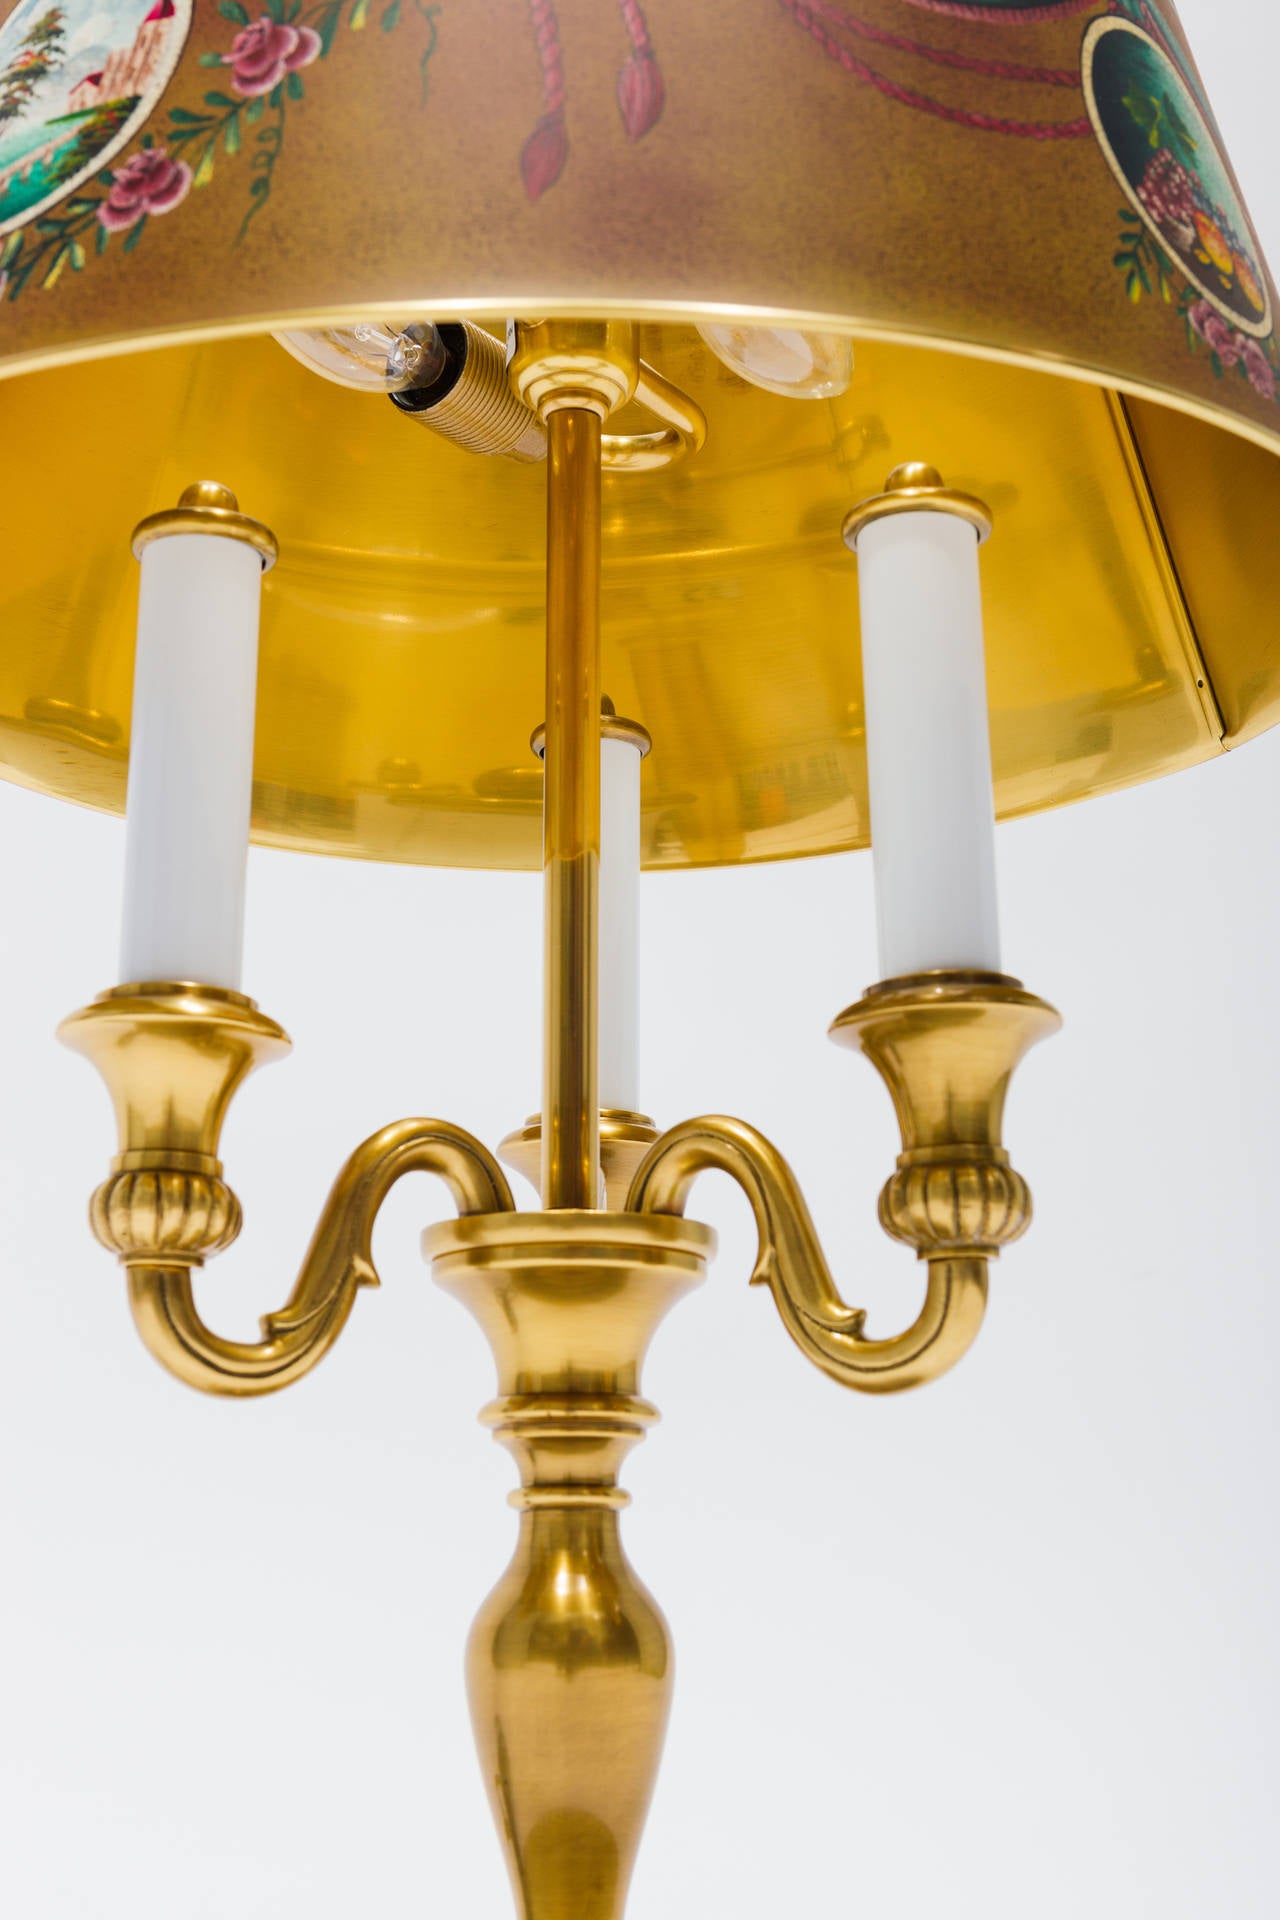 Italian lamp with hand-painted brass shade

Height from base to top of finial is 26.5